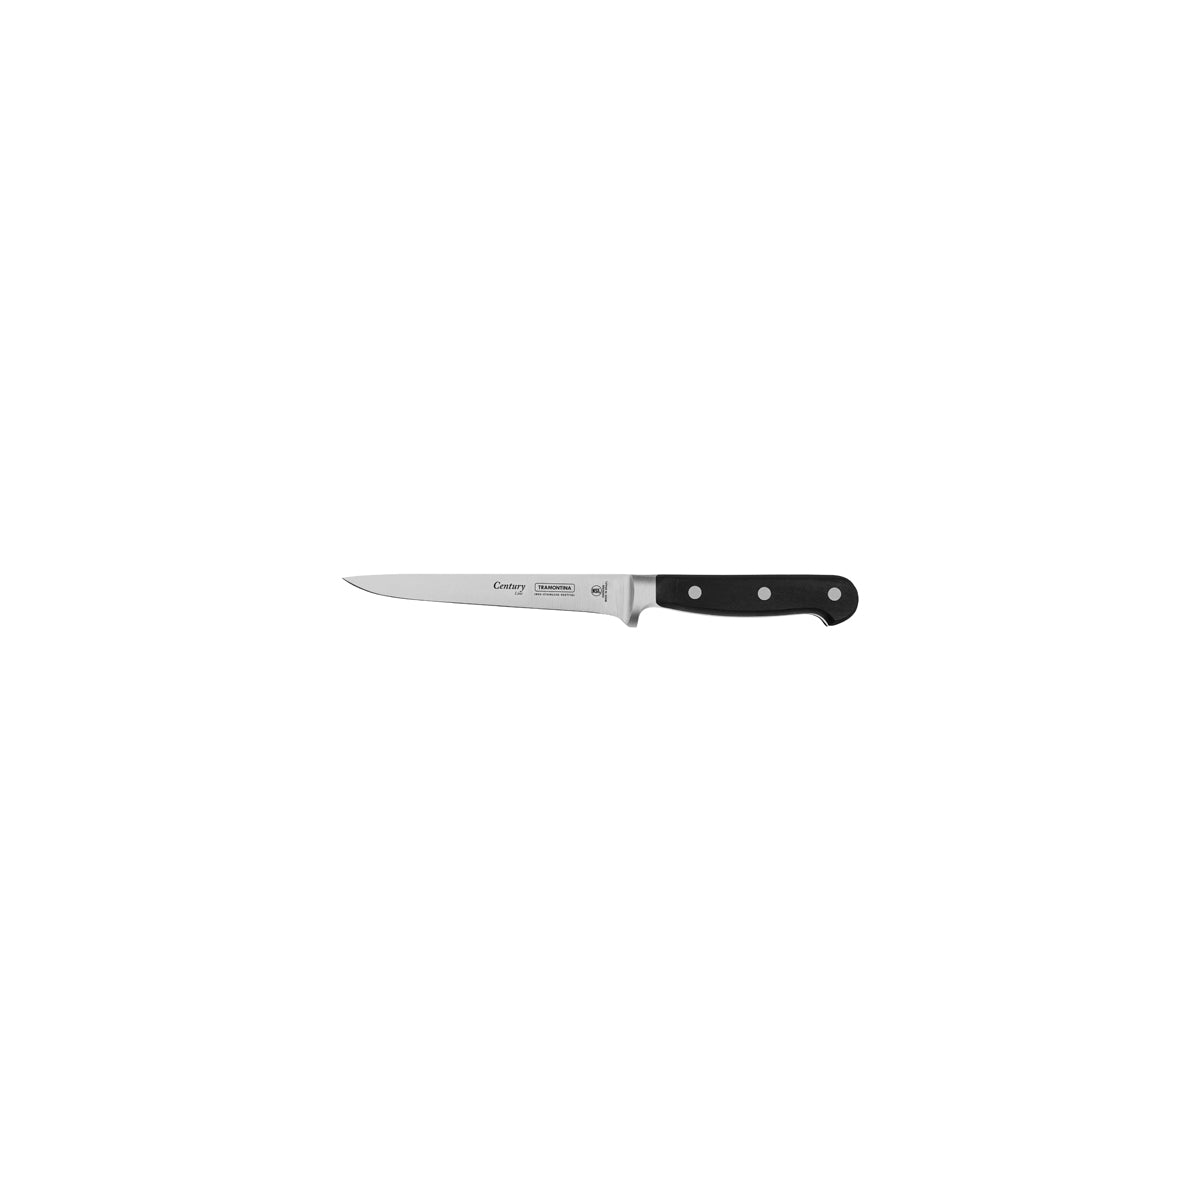 TM24006/106 Tramontina Century Boning Knife Curved Narrow Blade with Forged Handle Black 152mm Tomkin Australia Hospitality Supplies